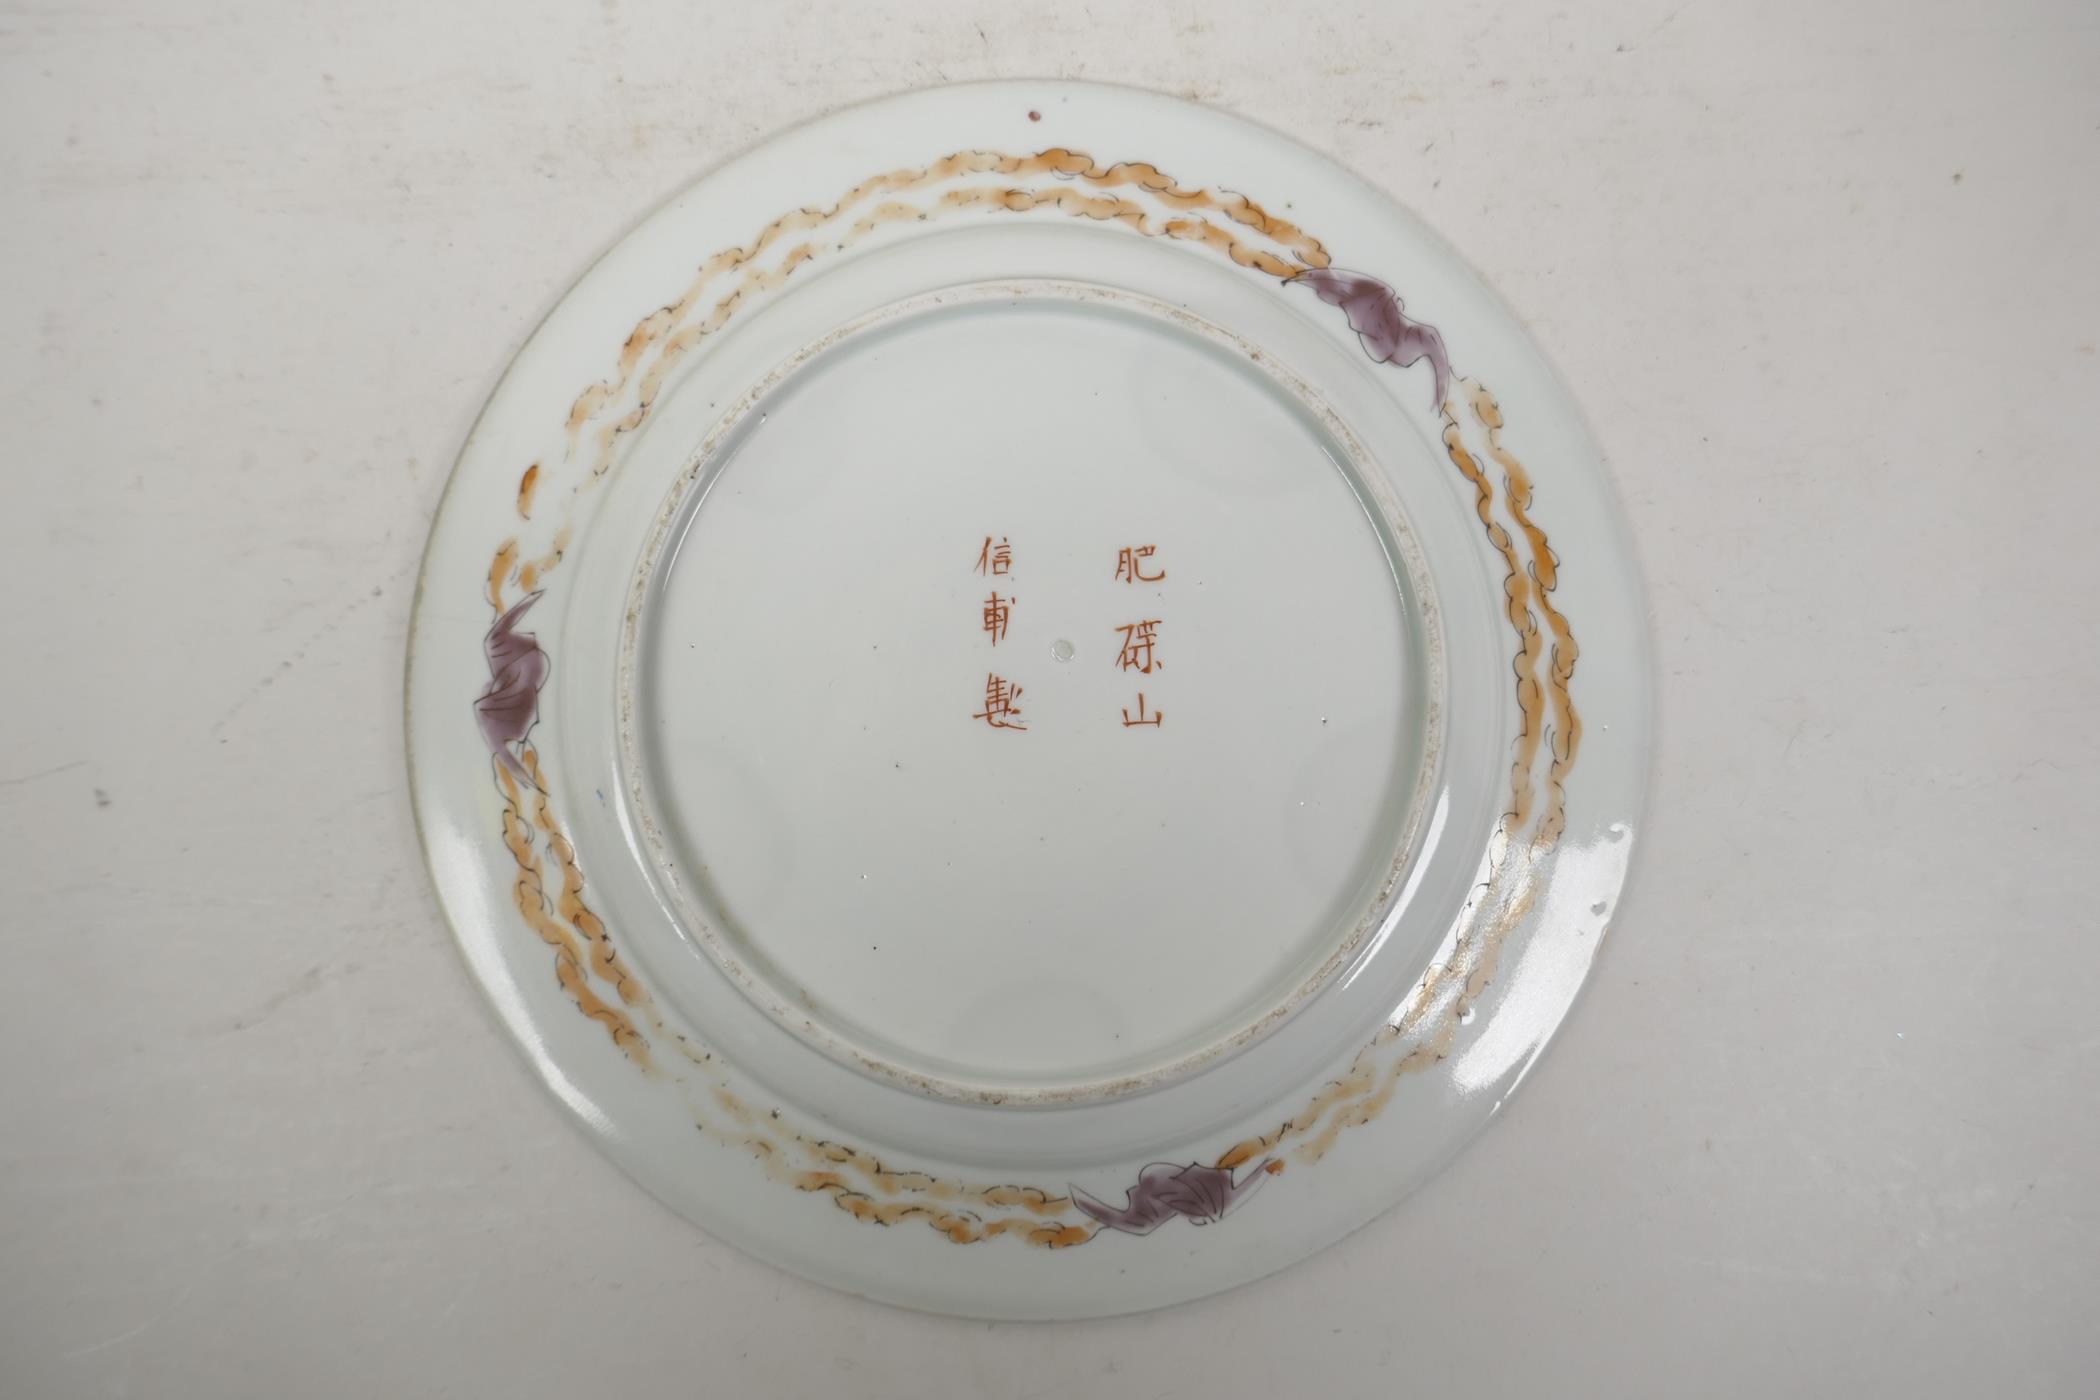 A Chinese porcelain cabinet plate with decorative panels depicting birds and flowers, 6 character - Image 2 of 4